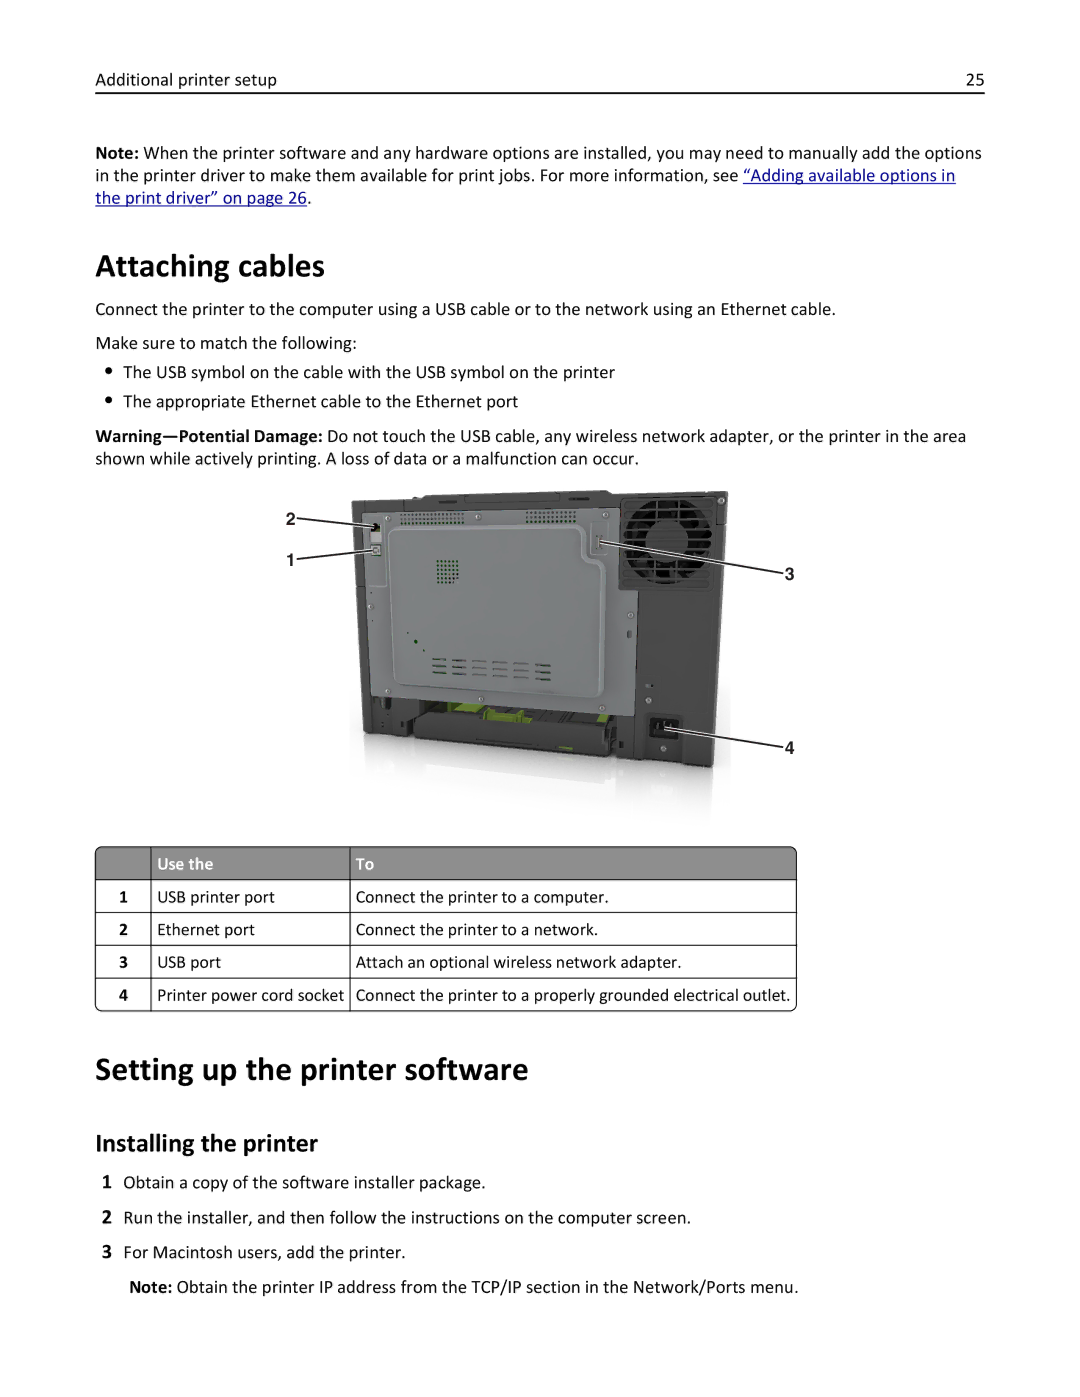 Lexmark CS410 manual Attaching cables, Setting up the printer software, Installing the printer 